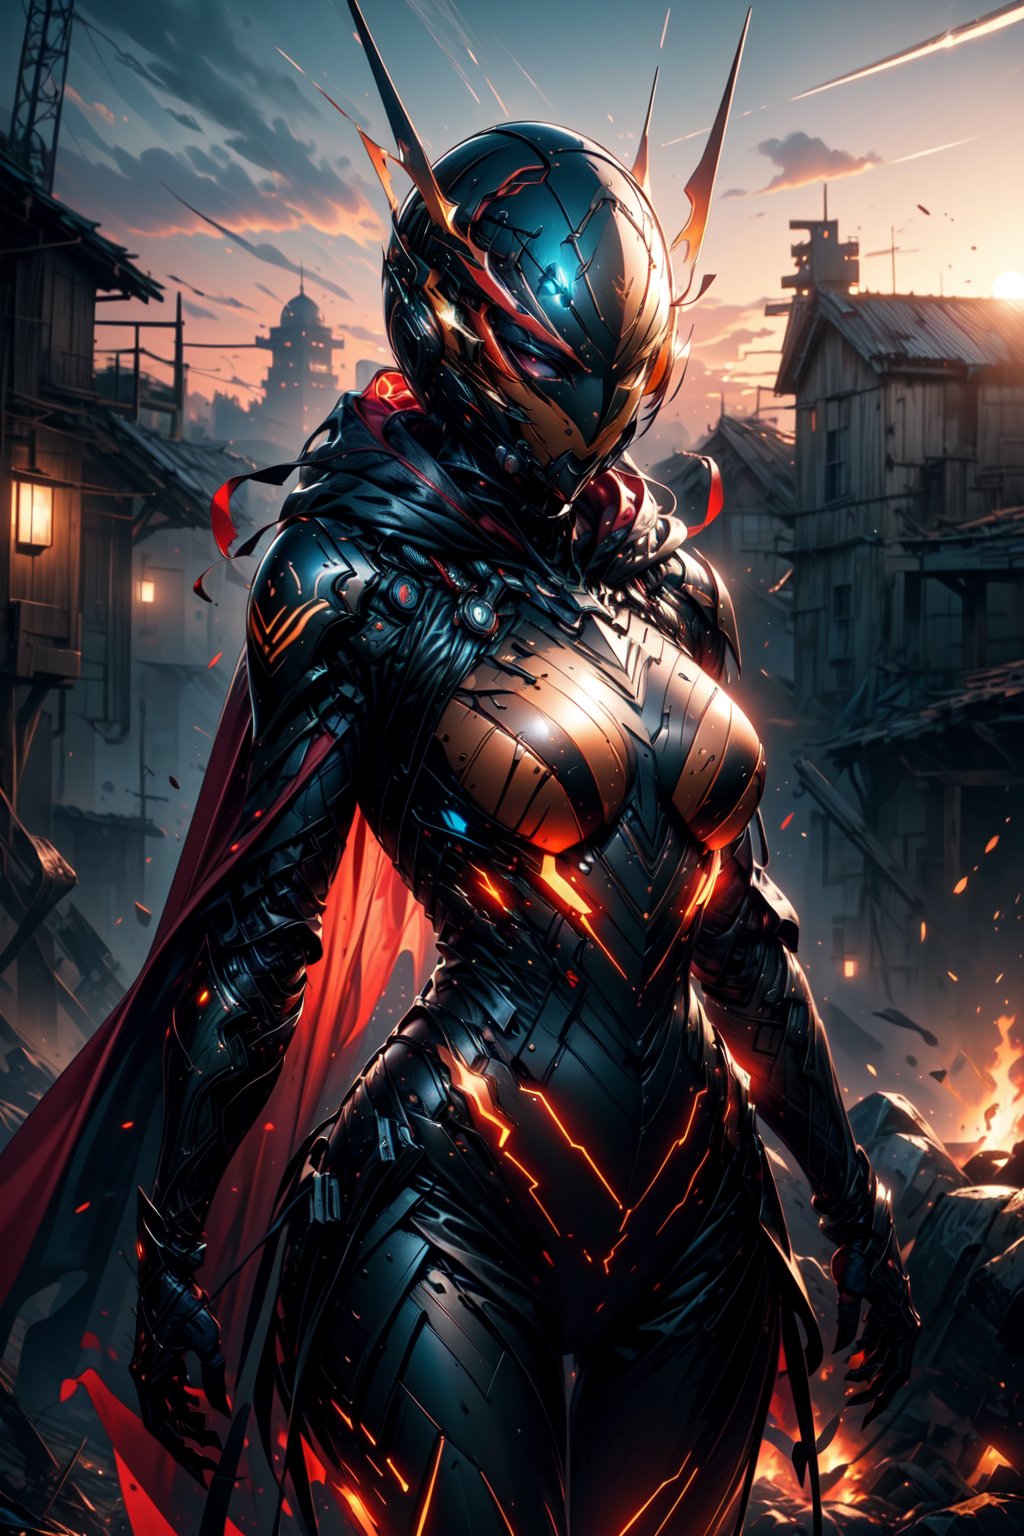  (((alone:1.2))), (((solo:1.2)),masterpiece,best quality,High definition, high resolution, a  25 years old woman in pilot suit, ornament detail pilot suit, sunset behint,, helmet pilot suit, outdors, metal claws, red cape